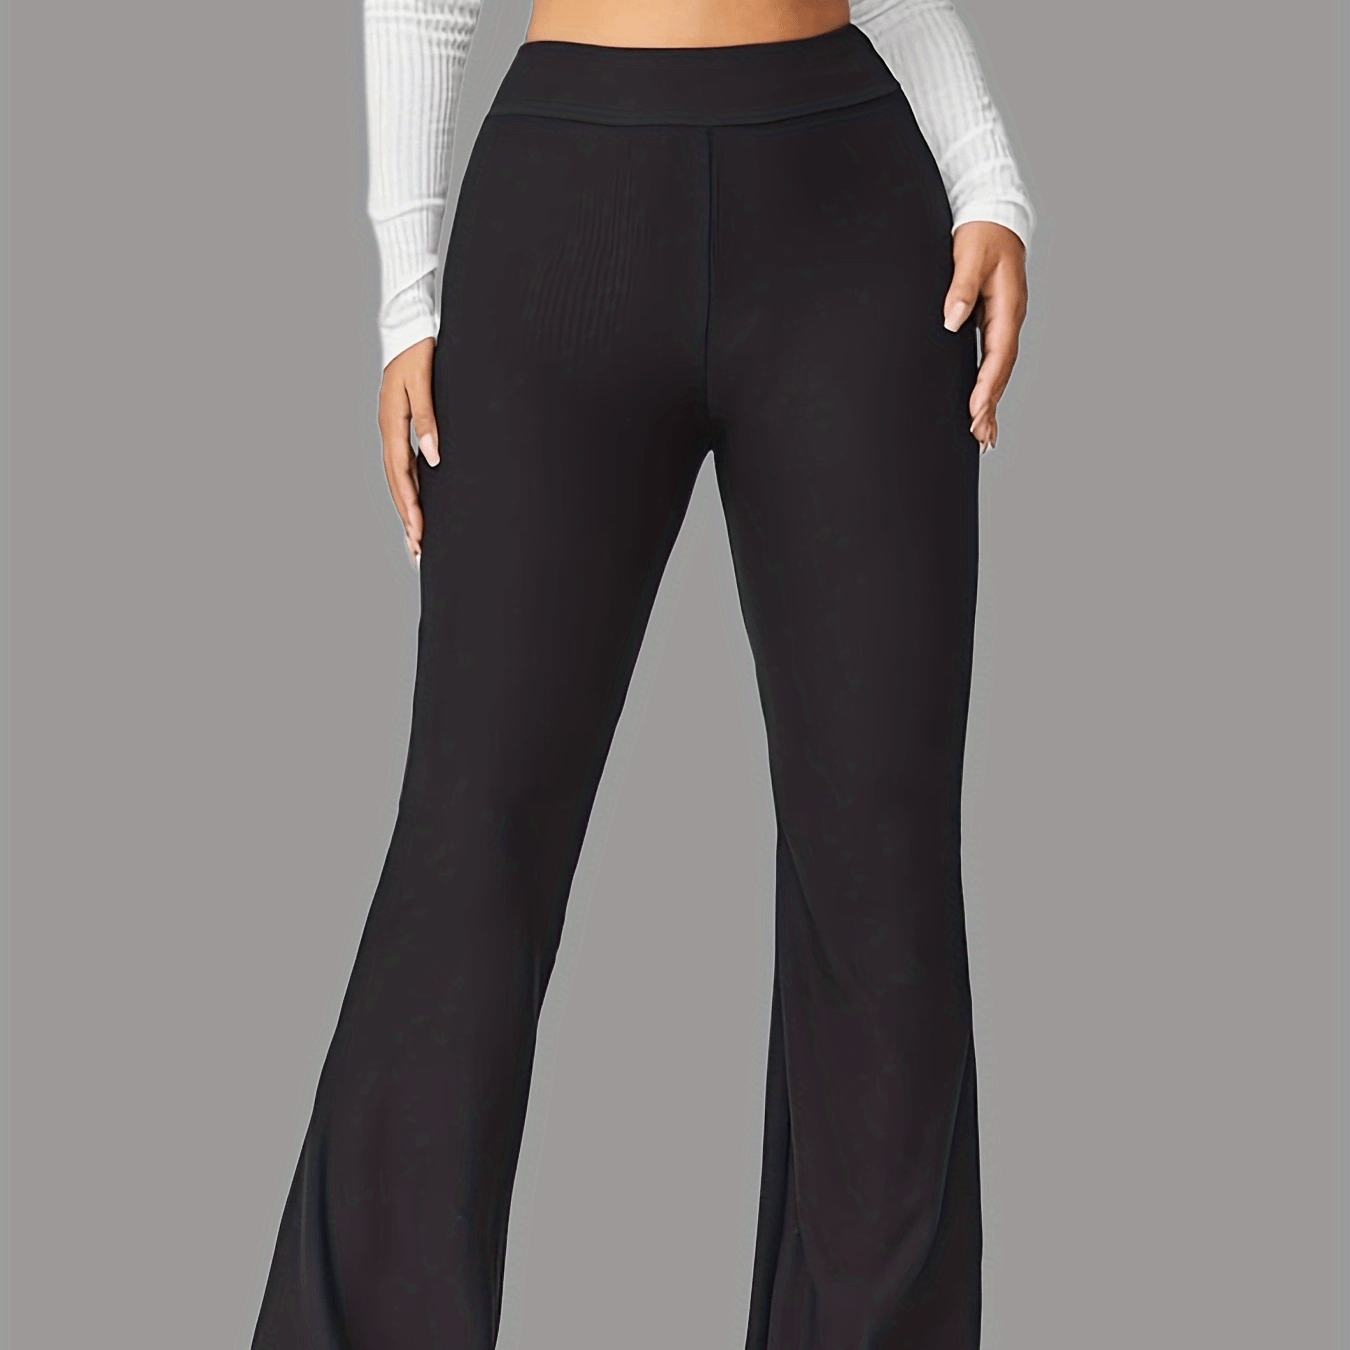 Y2k Loose Straight Flare Pants High Waist Wide Leg Workout